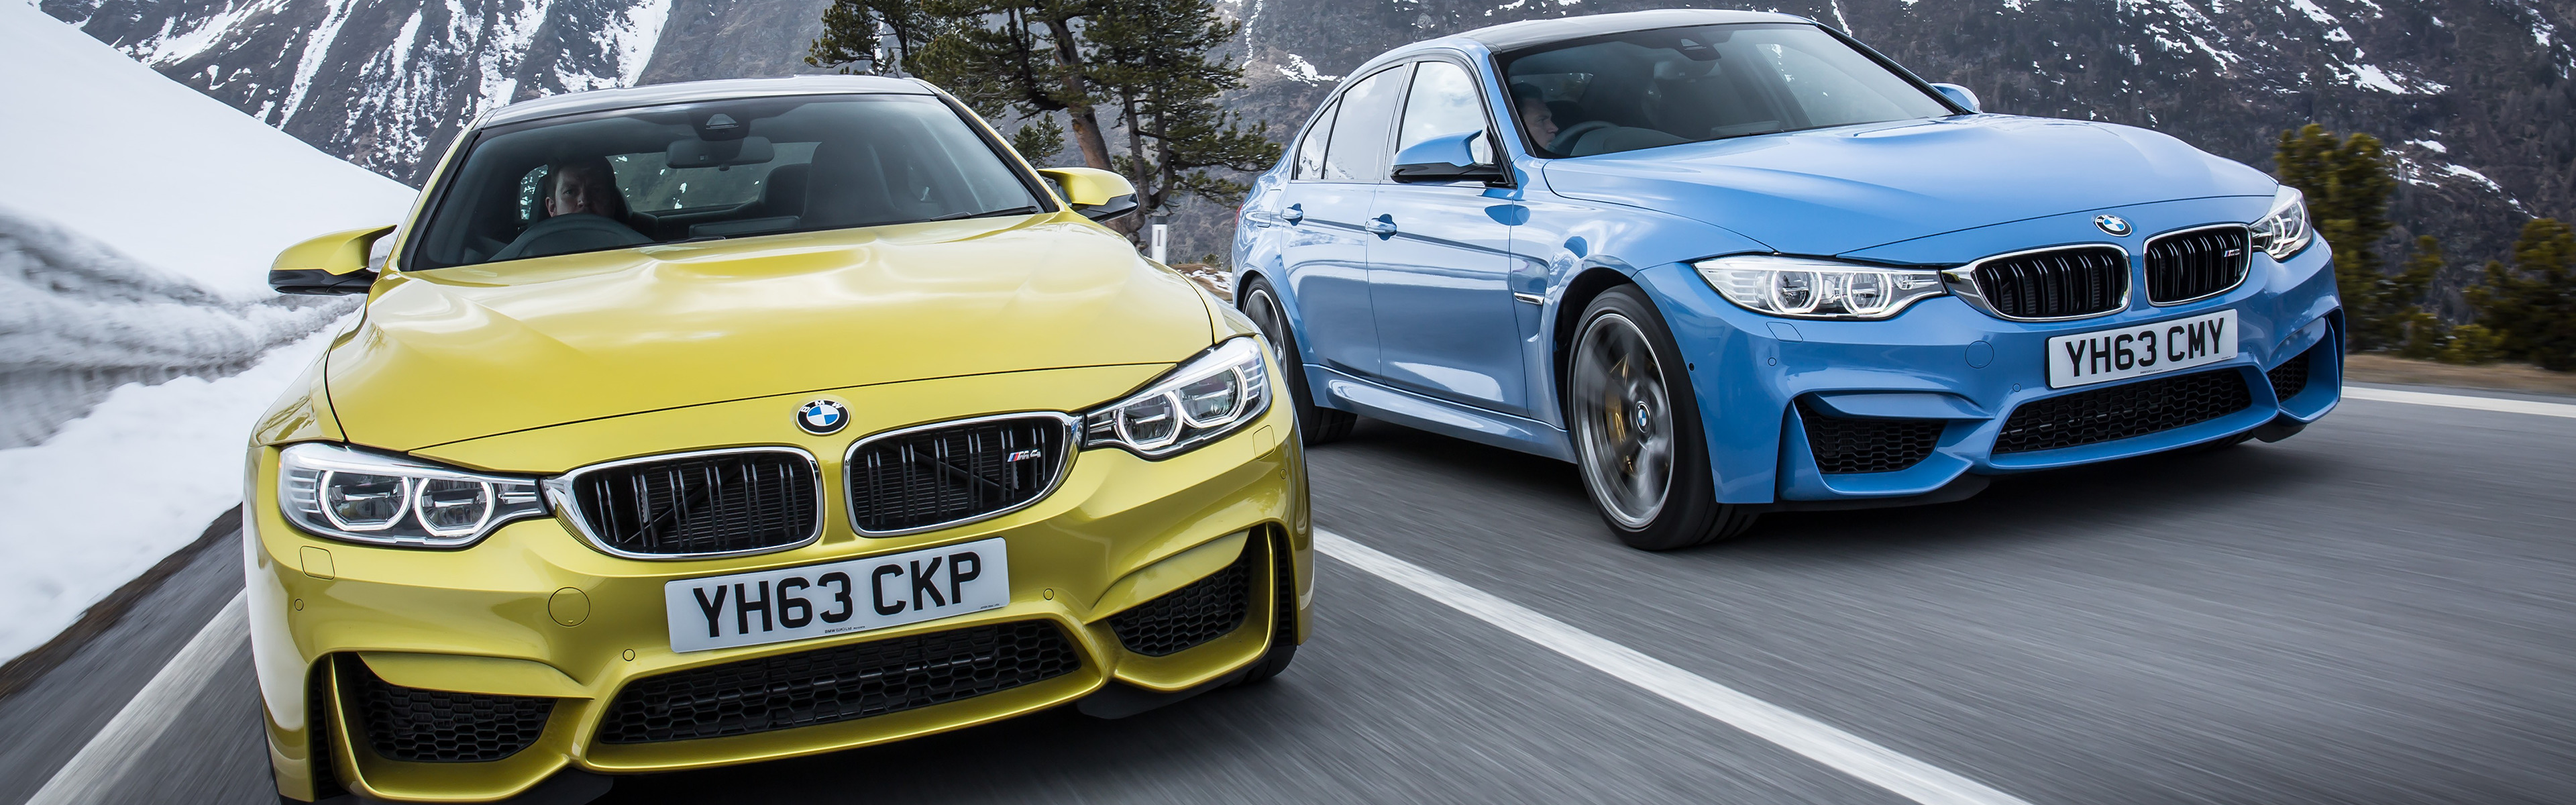 Bmw M3 And M4 - HD Wallpaper 